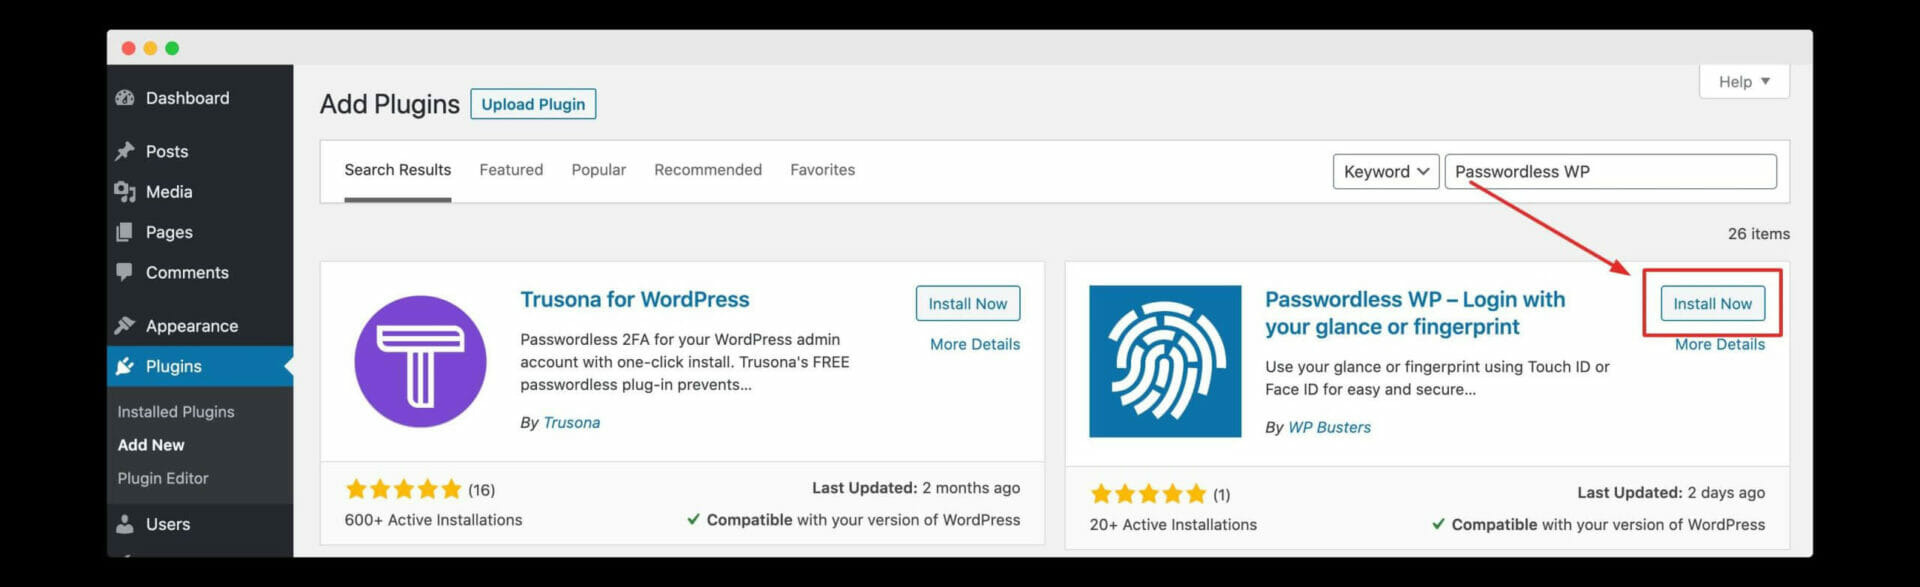 searching for the "passwordless wp" plugin on wordpress